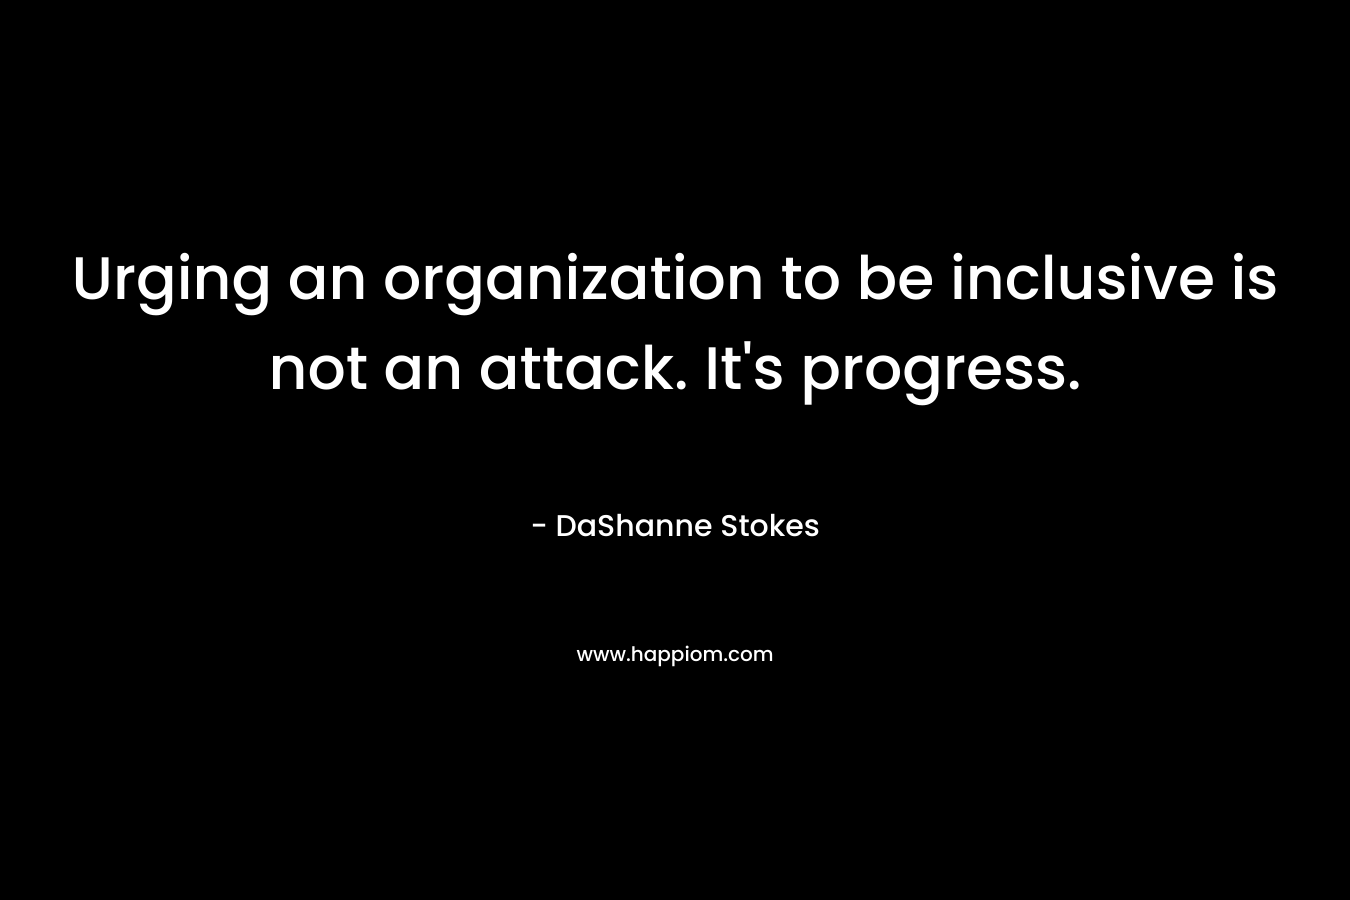 Urging an organization to be inclusive is not an attack. It’s progress. – DaShanne Stokes